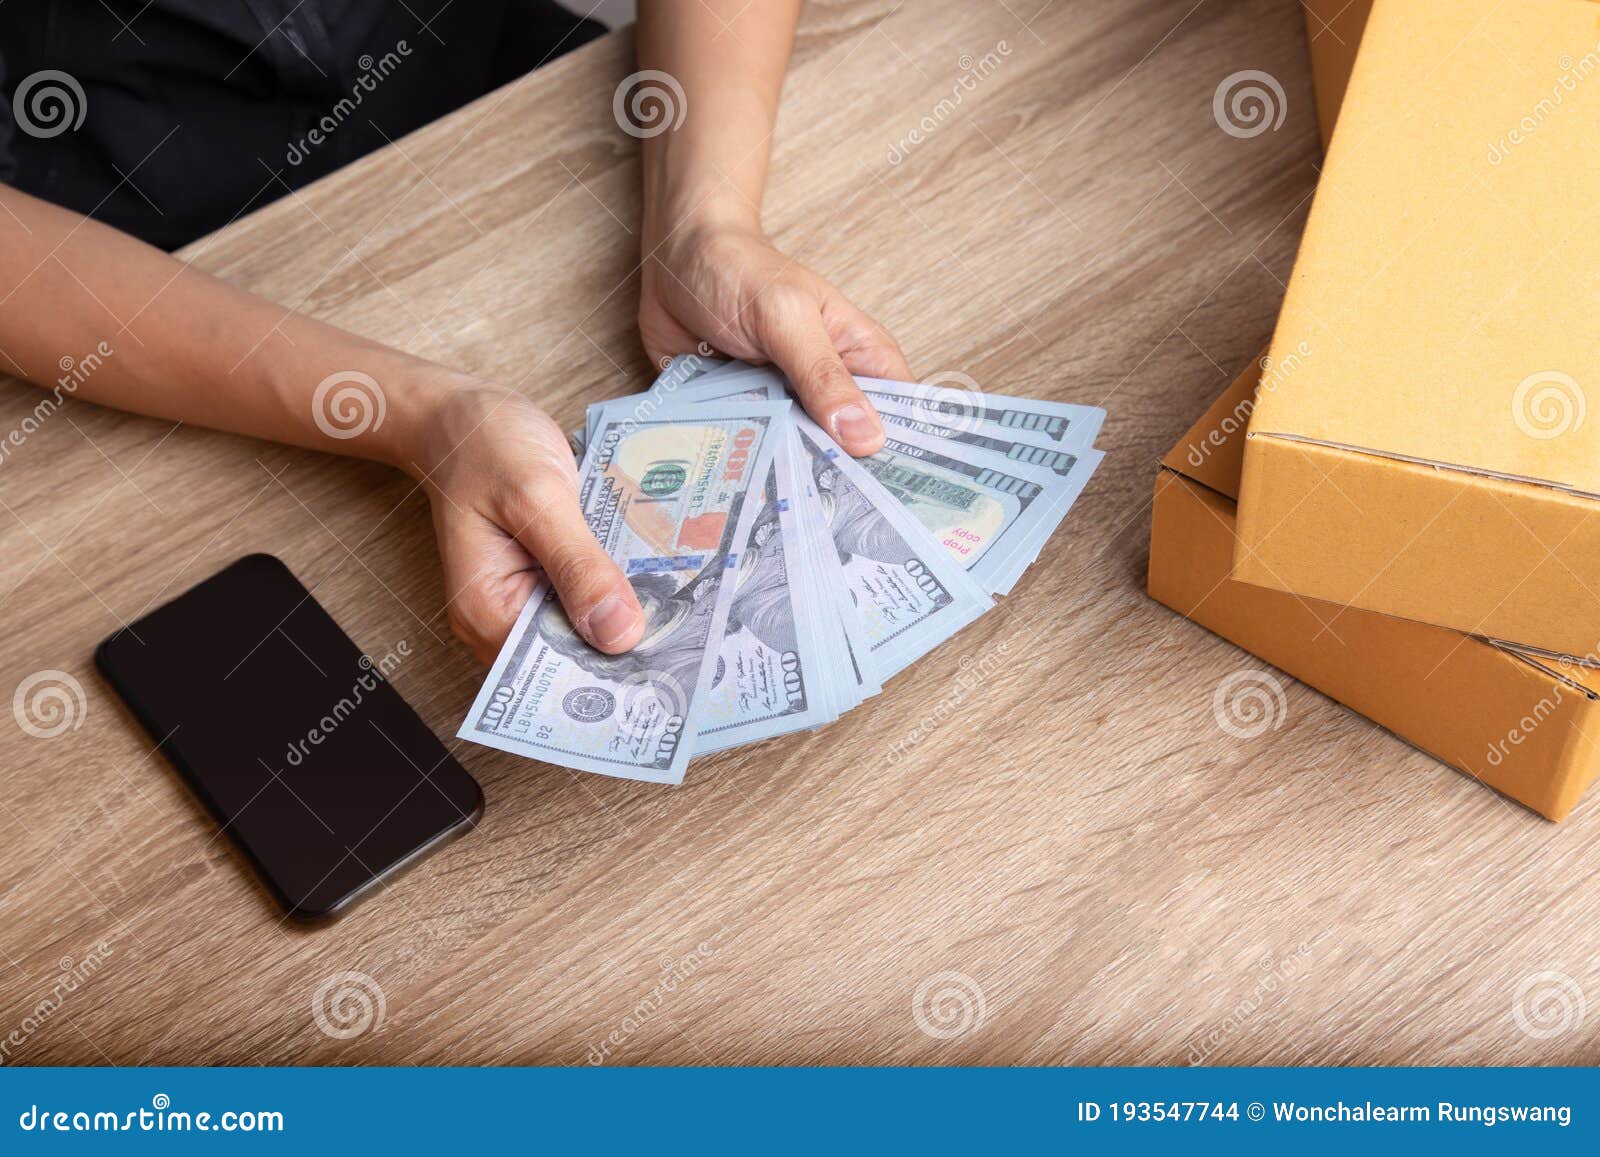 Download 9 896 Money Mockup Photos Free Royalty Free Stock Photos From Dreamstime